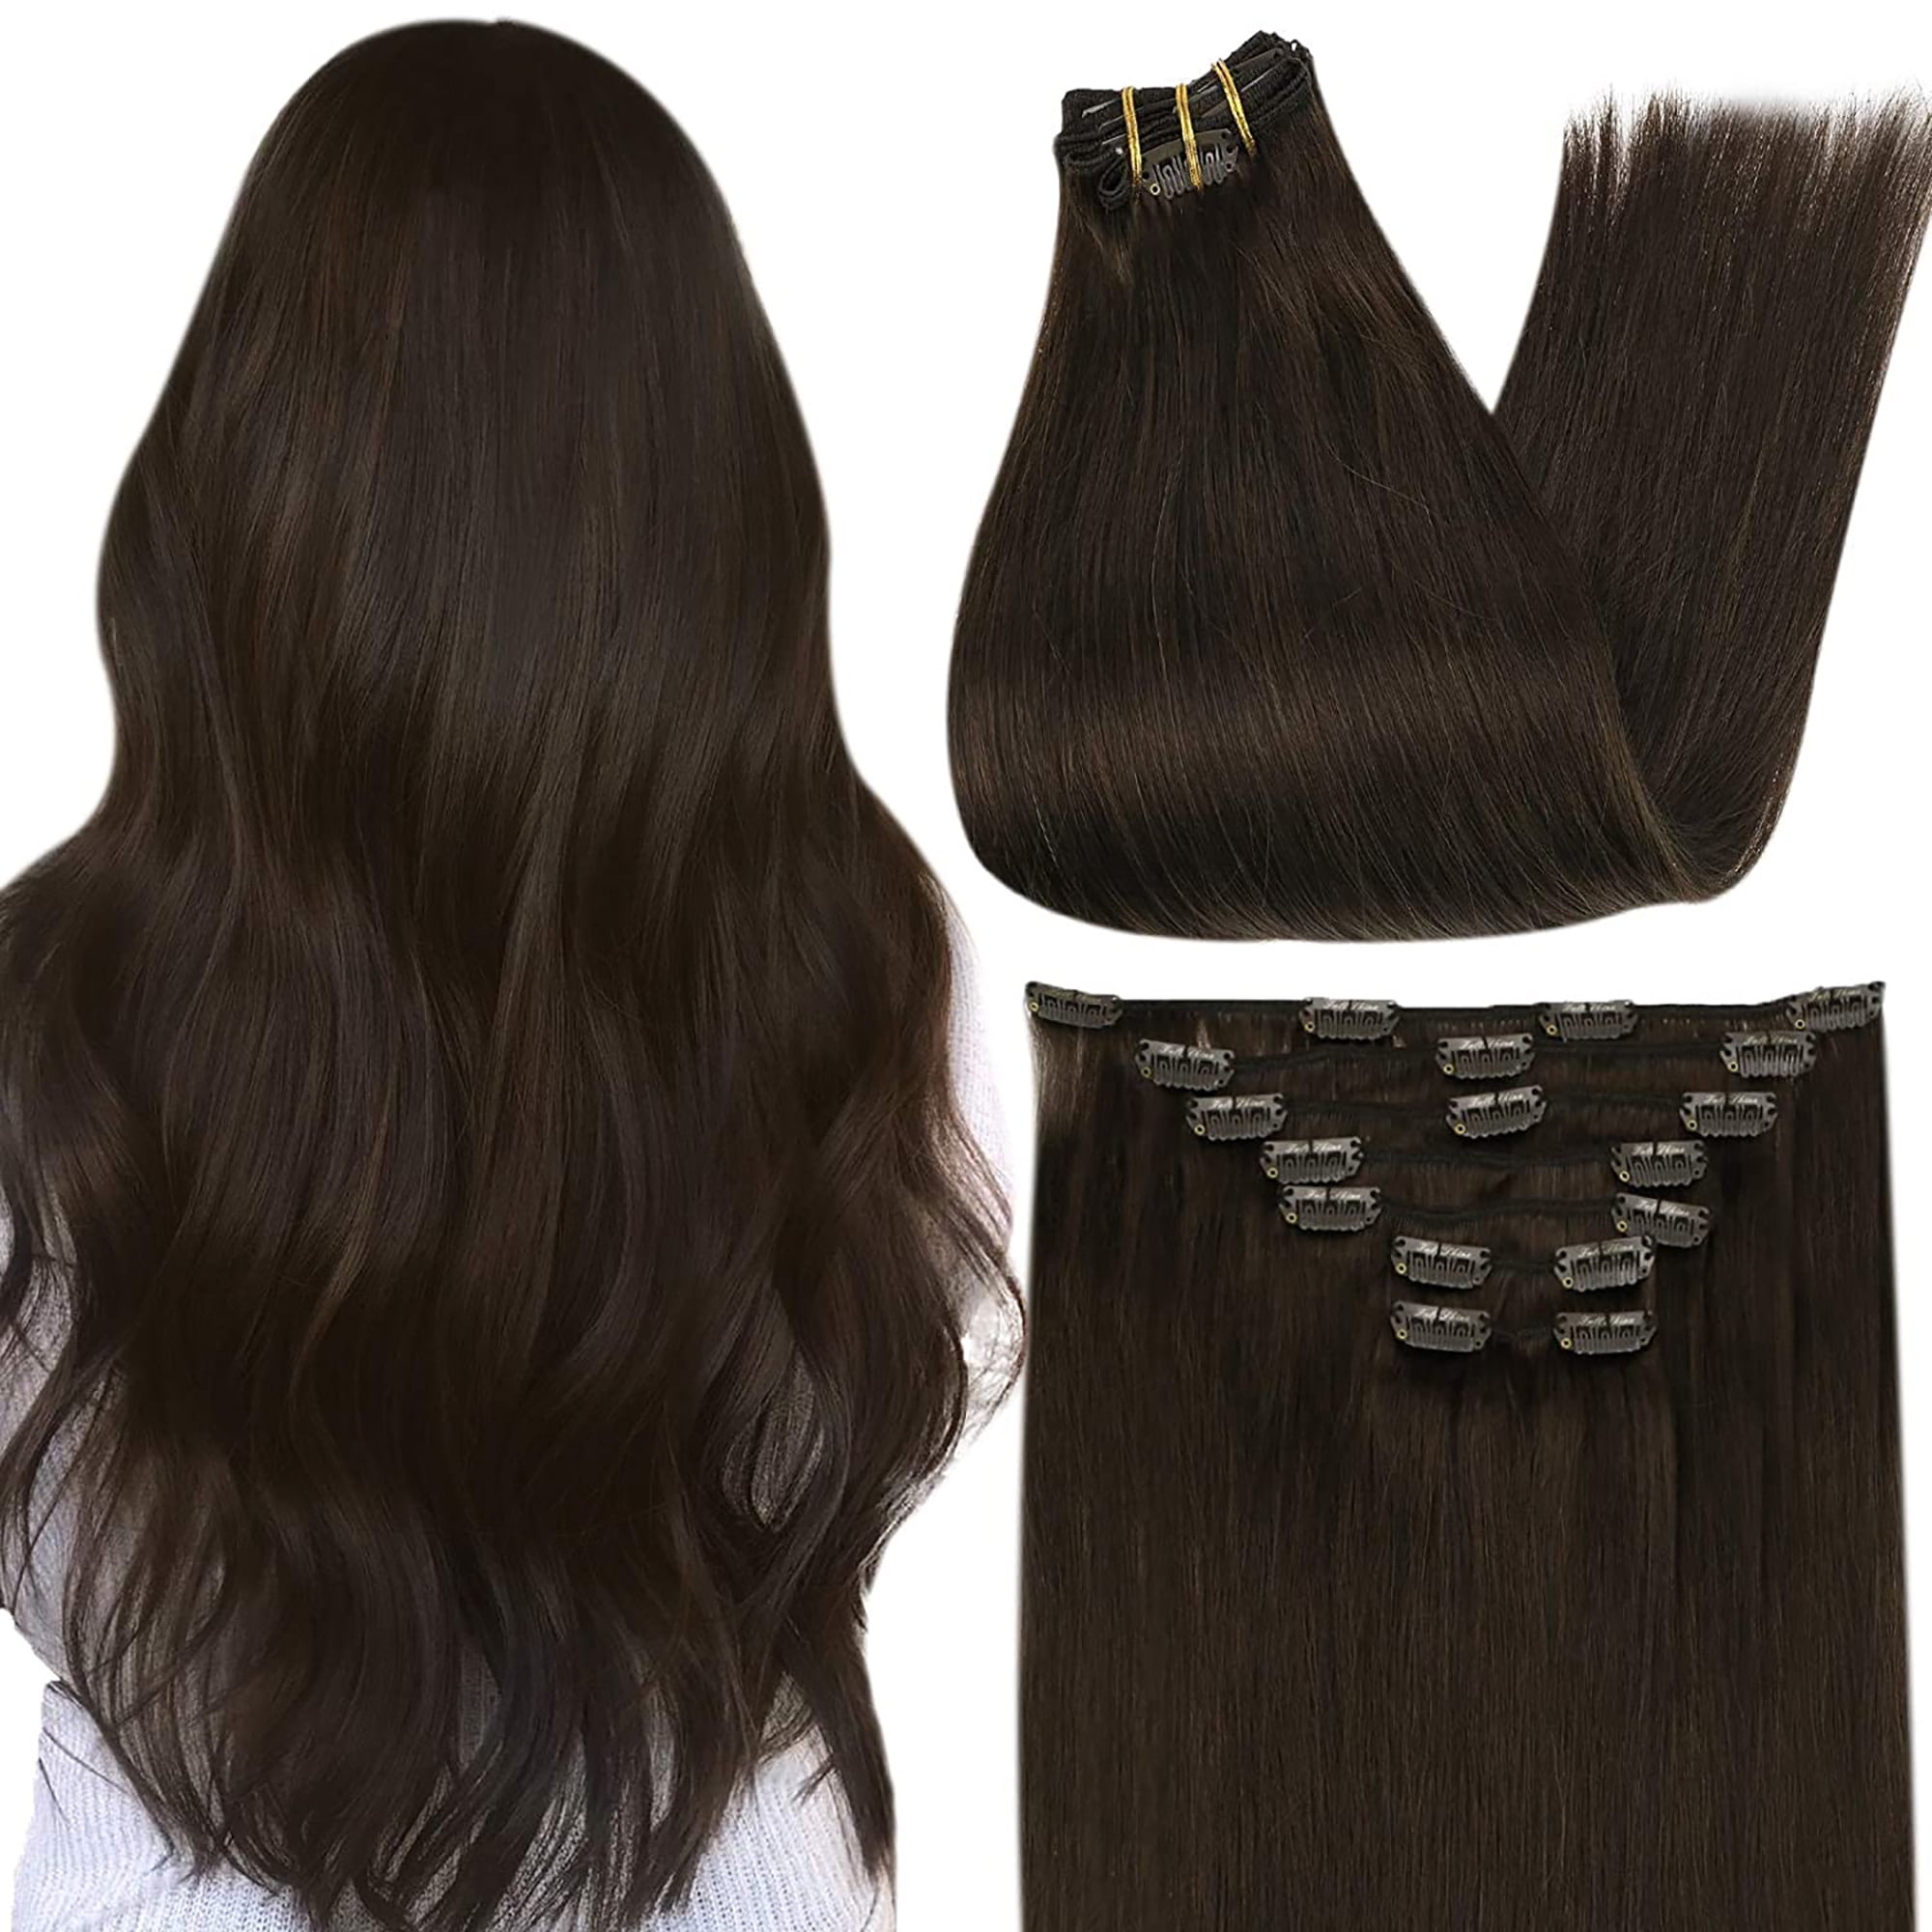 Leeons 16 colors 16 clips Long Straight Synthetic Hair Extensions Clips in  High Temperature Fiber Black Brown Hairpiece - Price history & Review, AliExpress Seller - Leeons Hair Product Store